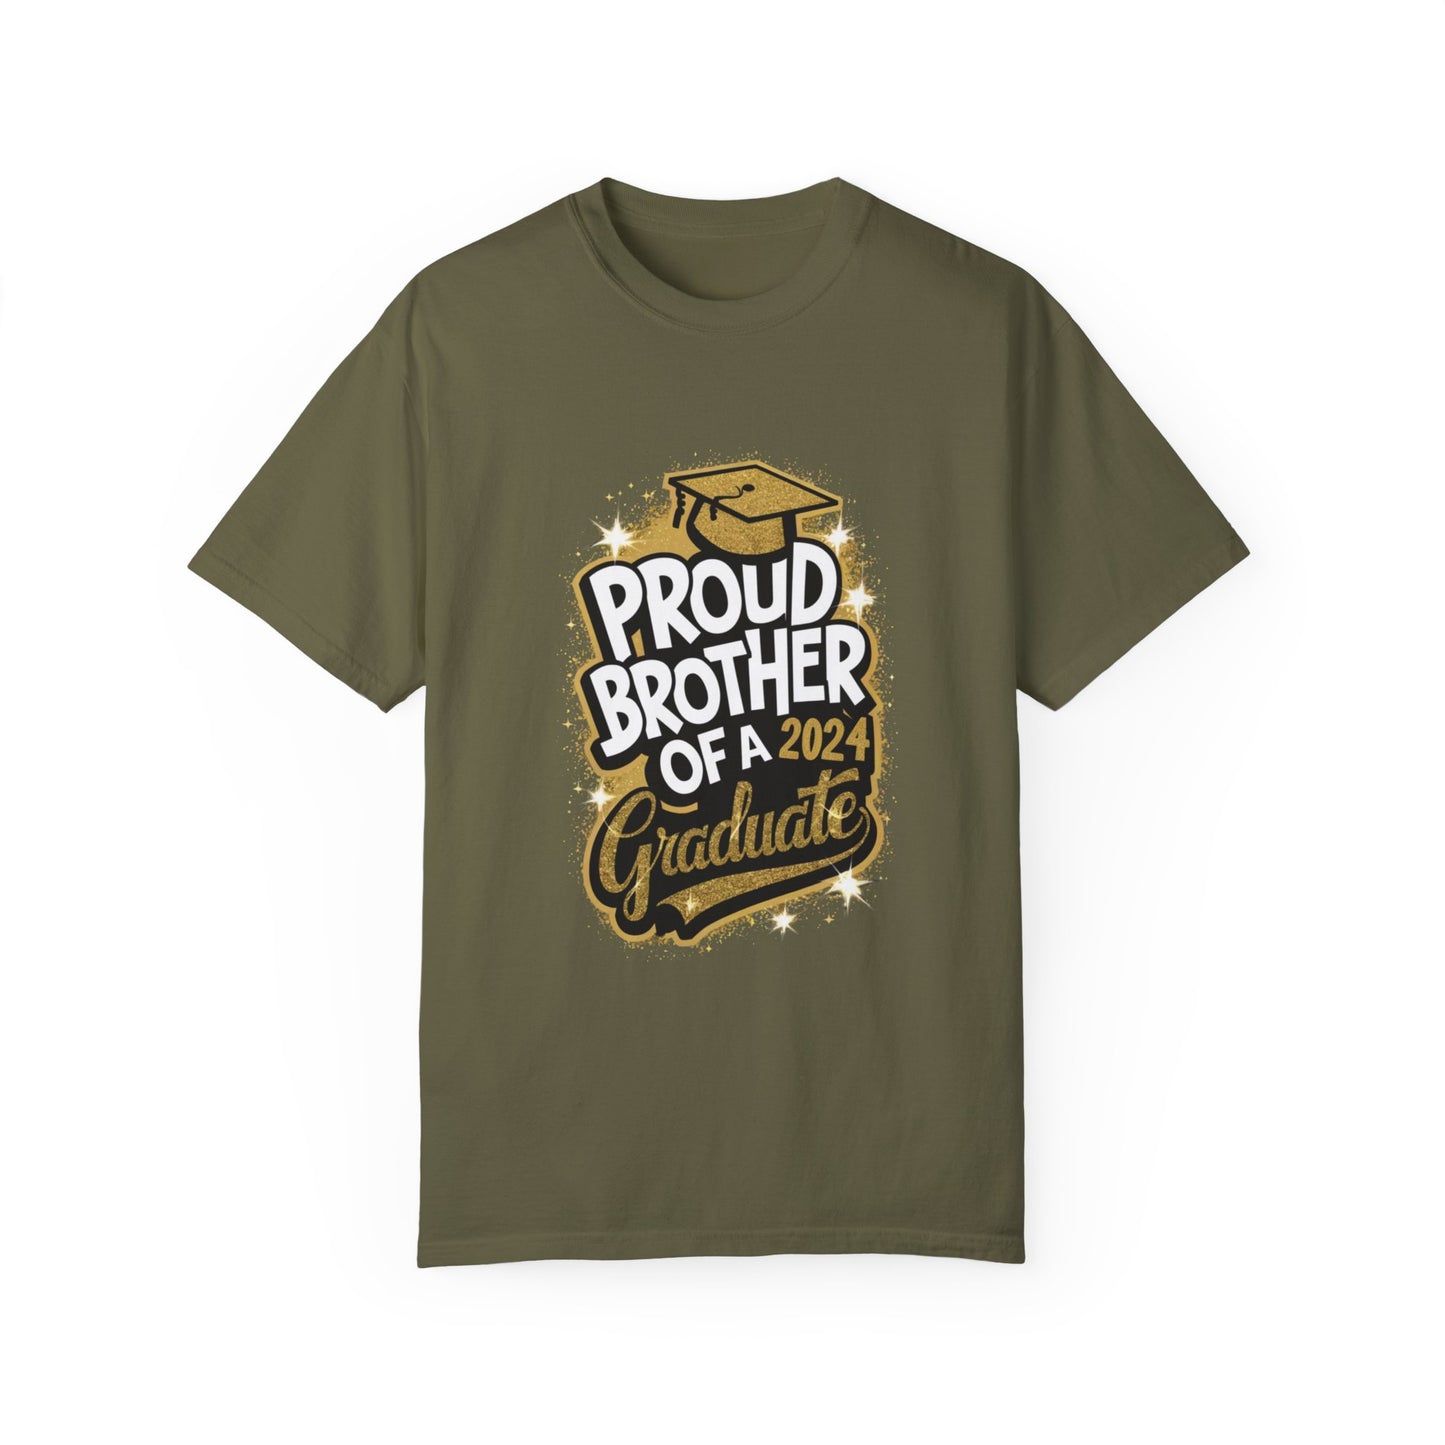 Proud Brother of a 2024 Graduate Unisex Garment-dyed T-shirt Cotton Funny Humorous Graphic Soft Premium Unisex Men Women Sage T-shirt Birthday Gift-13